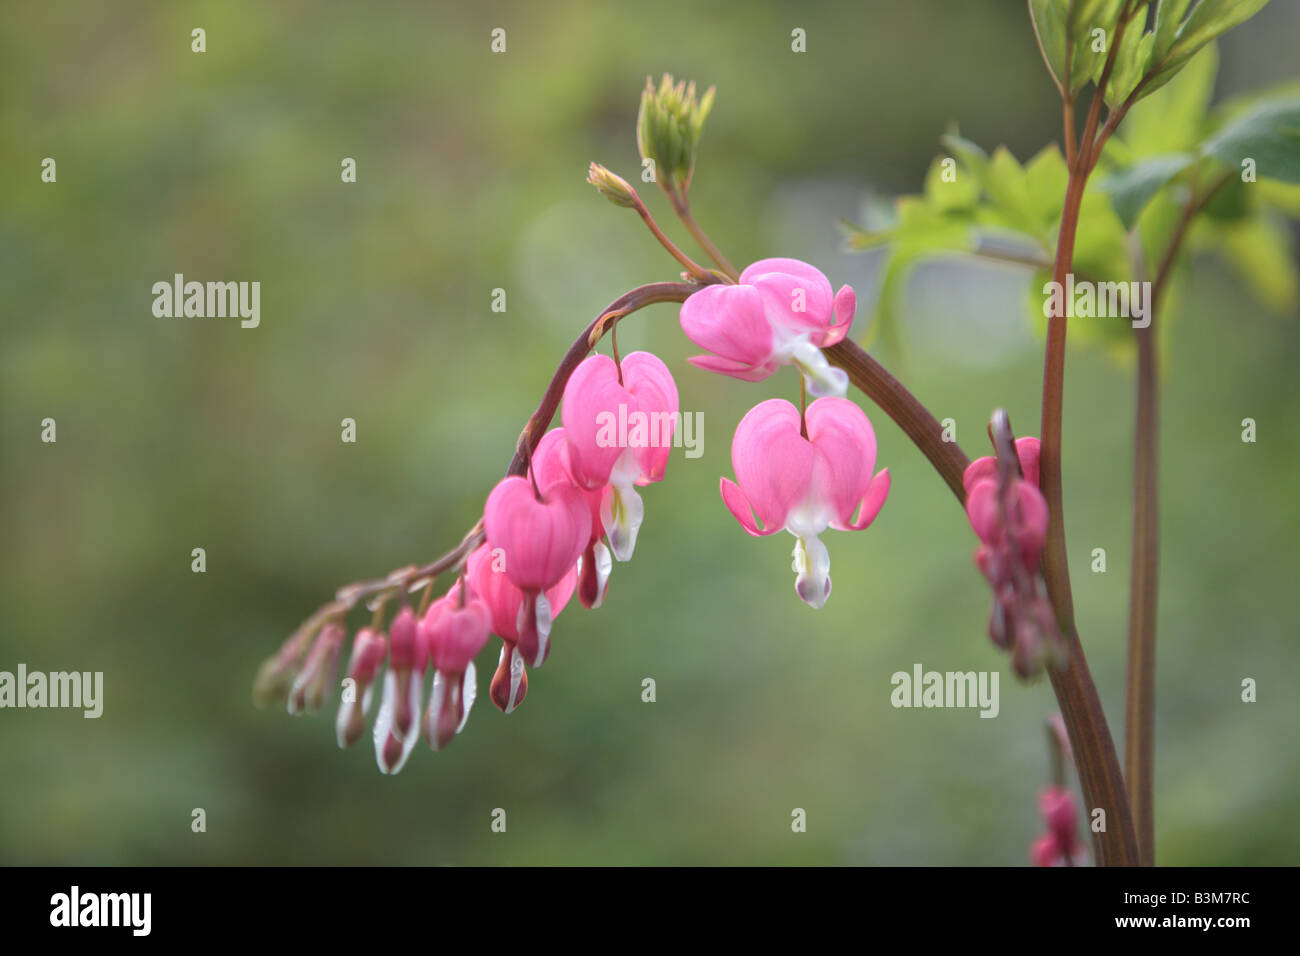 BLEEDING HEART DICENTRA SPECTABILIS FLOWER IN MAY IN NORTHERN ILLINOIS USA Stock Photo